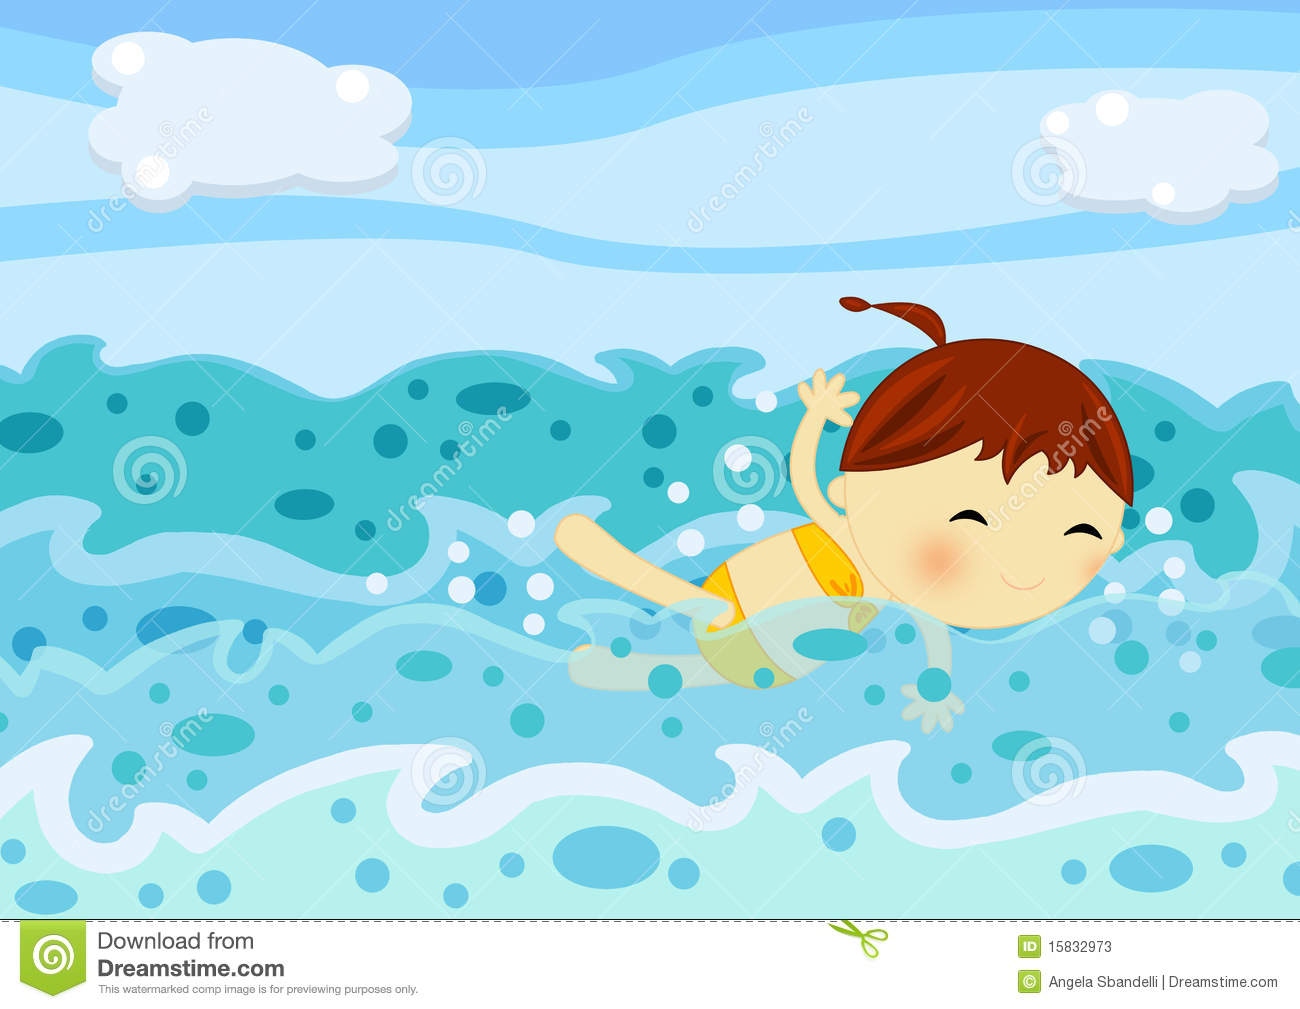 Illustration About A Cute Little Girl Swimming With Joy Through The